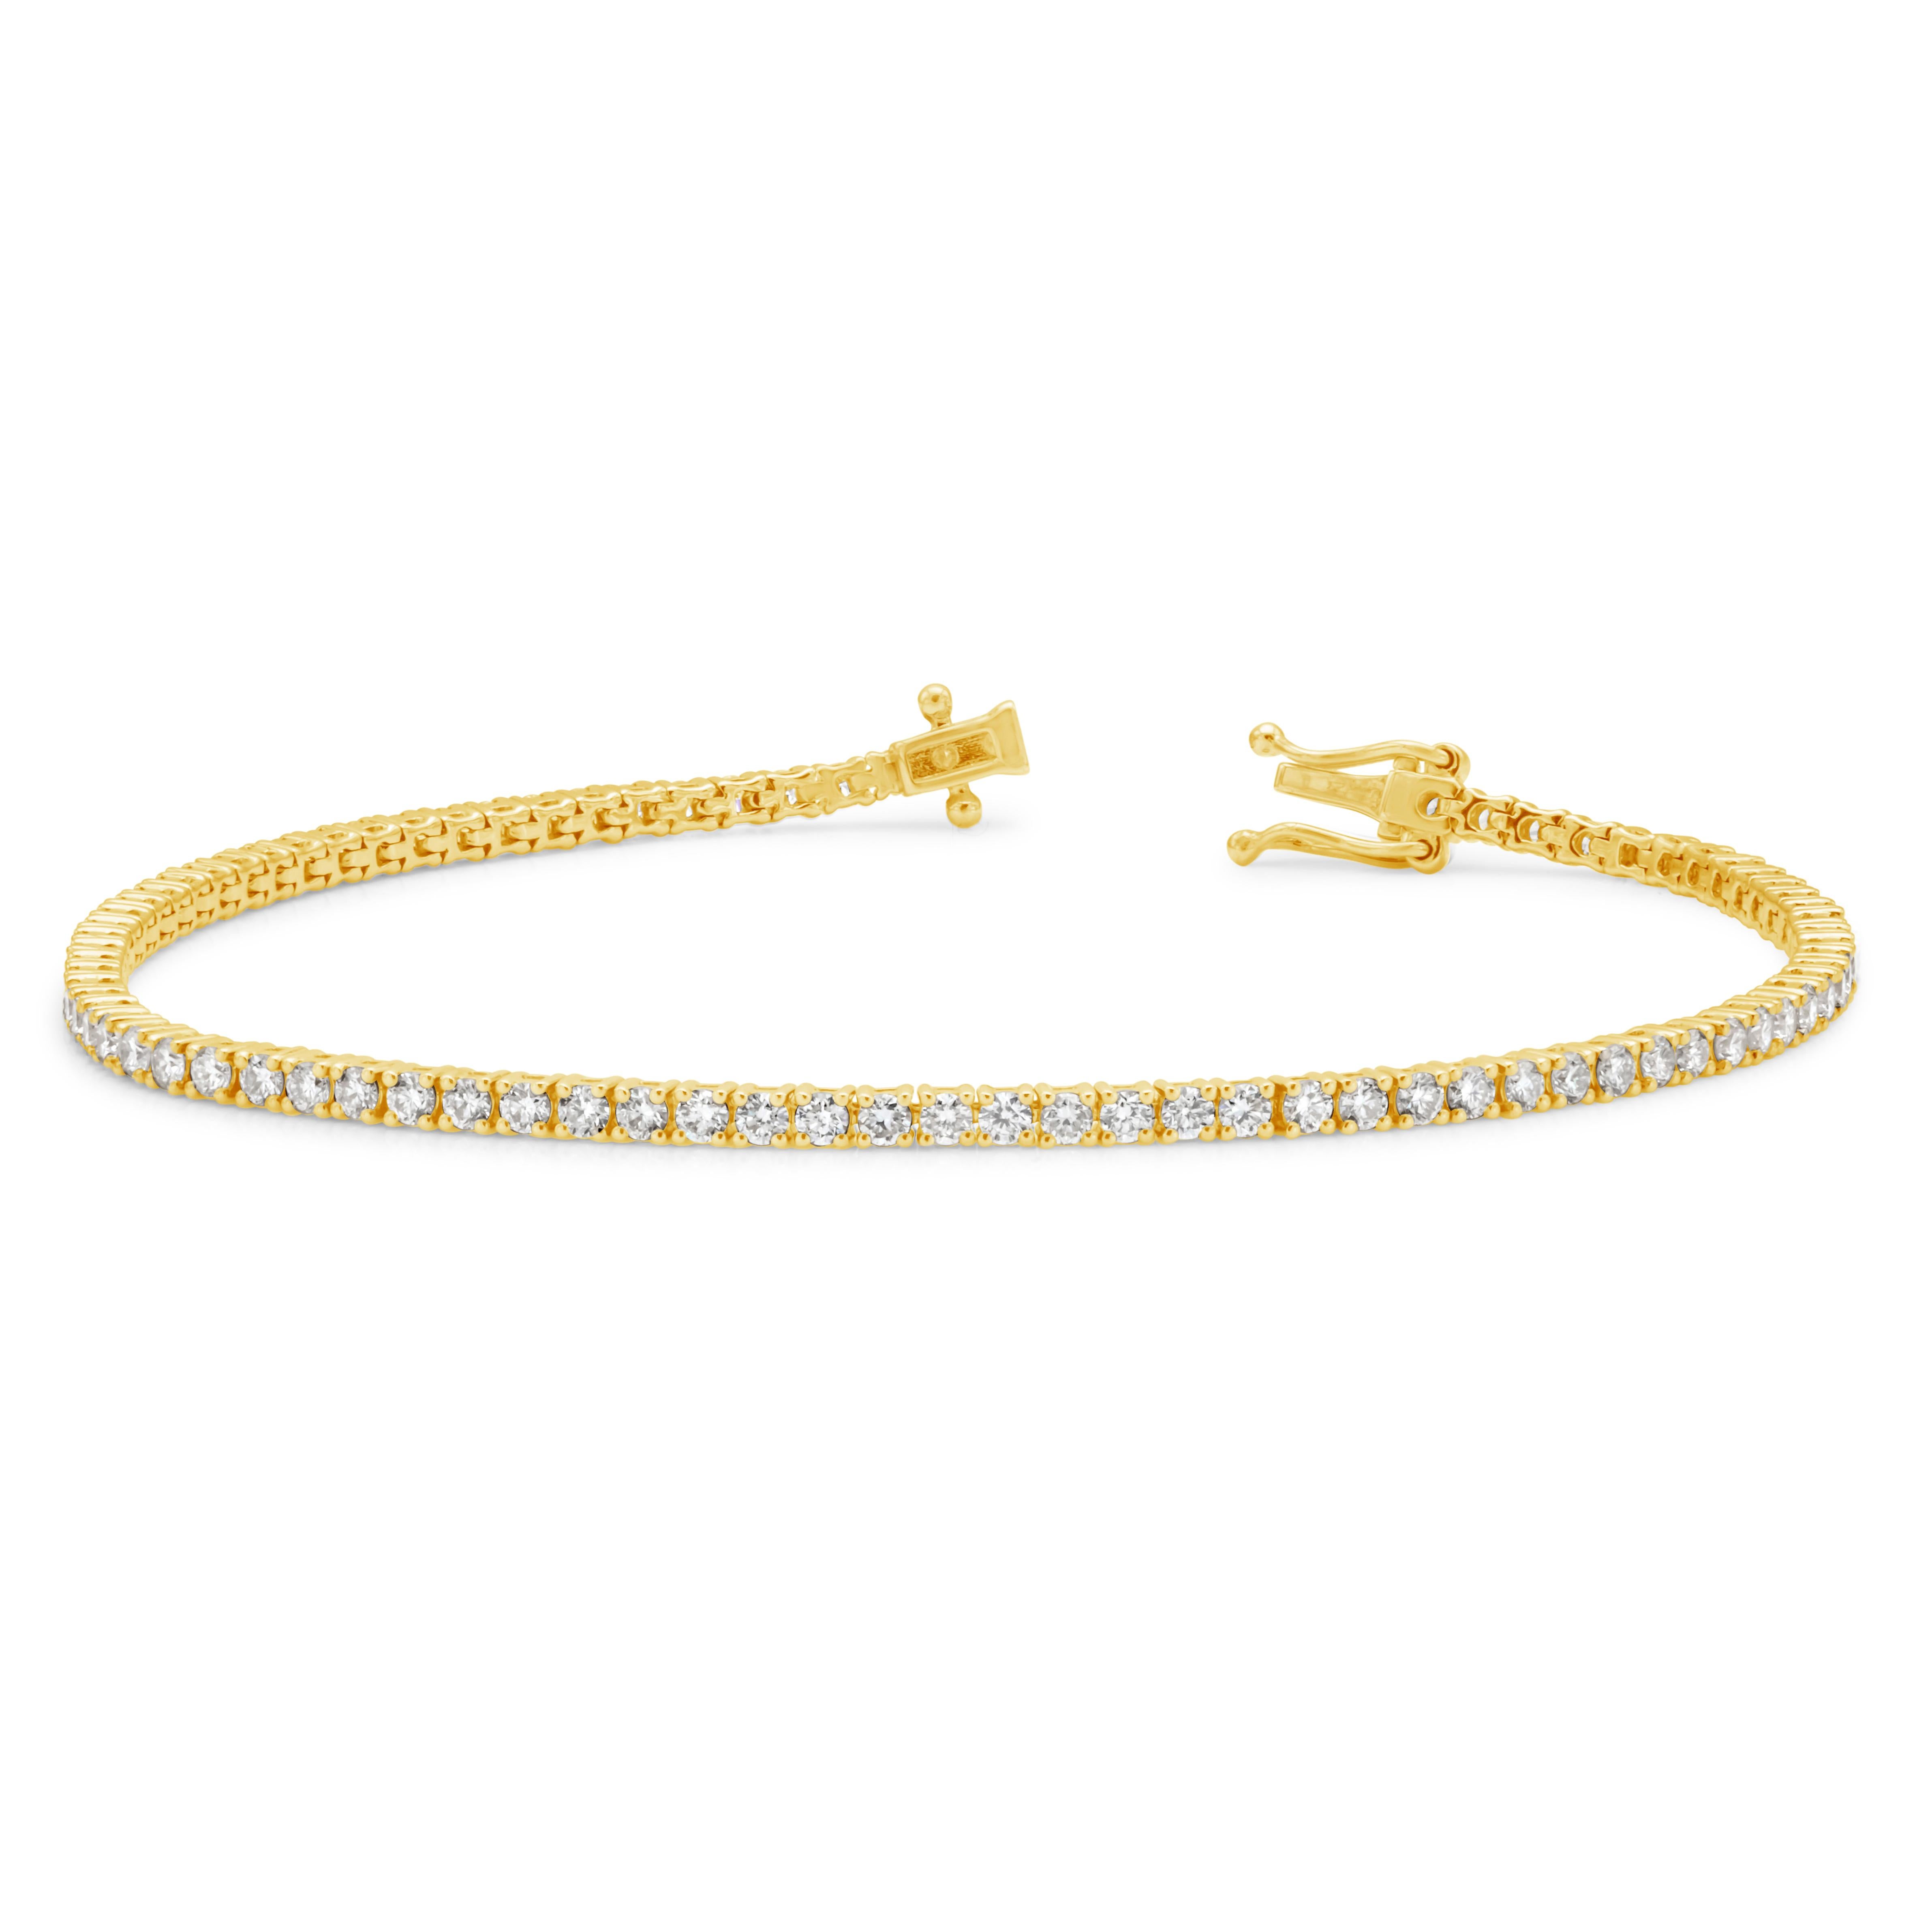 A classic tennis bracelet style showcasing 84 round brilliant diamonds weighing 2.16 carats total, F Color and VS2-SI1 in Clarity. Set in a four prong setting and Made with 18K yellow gold. 17.5cm in length and 1.80mm in width.

Style available in